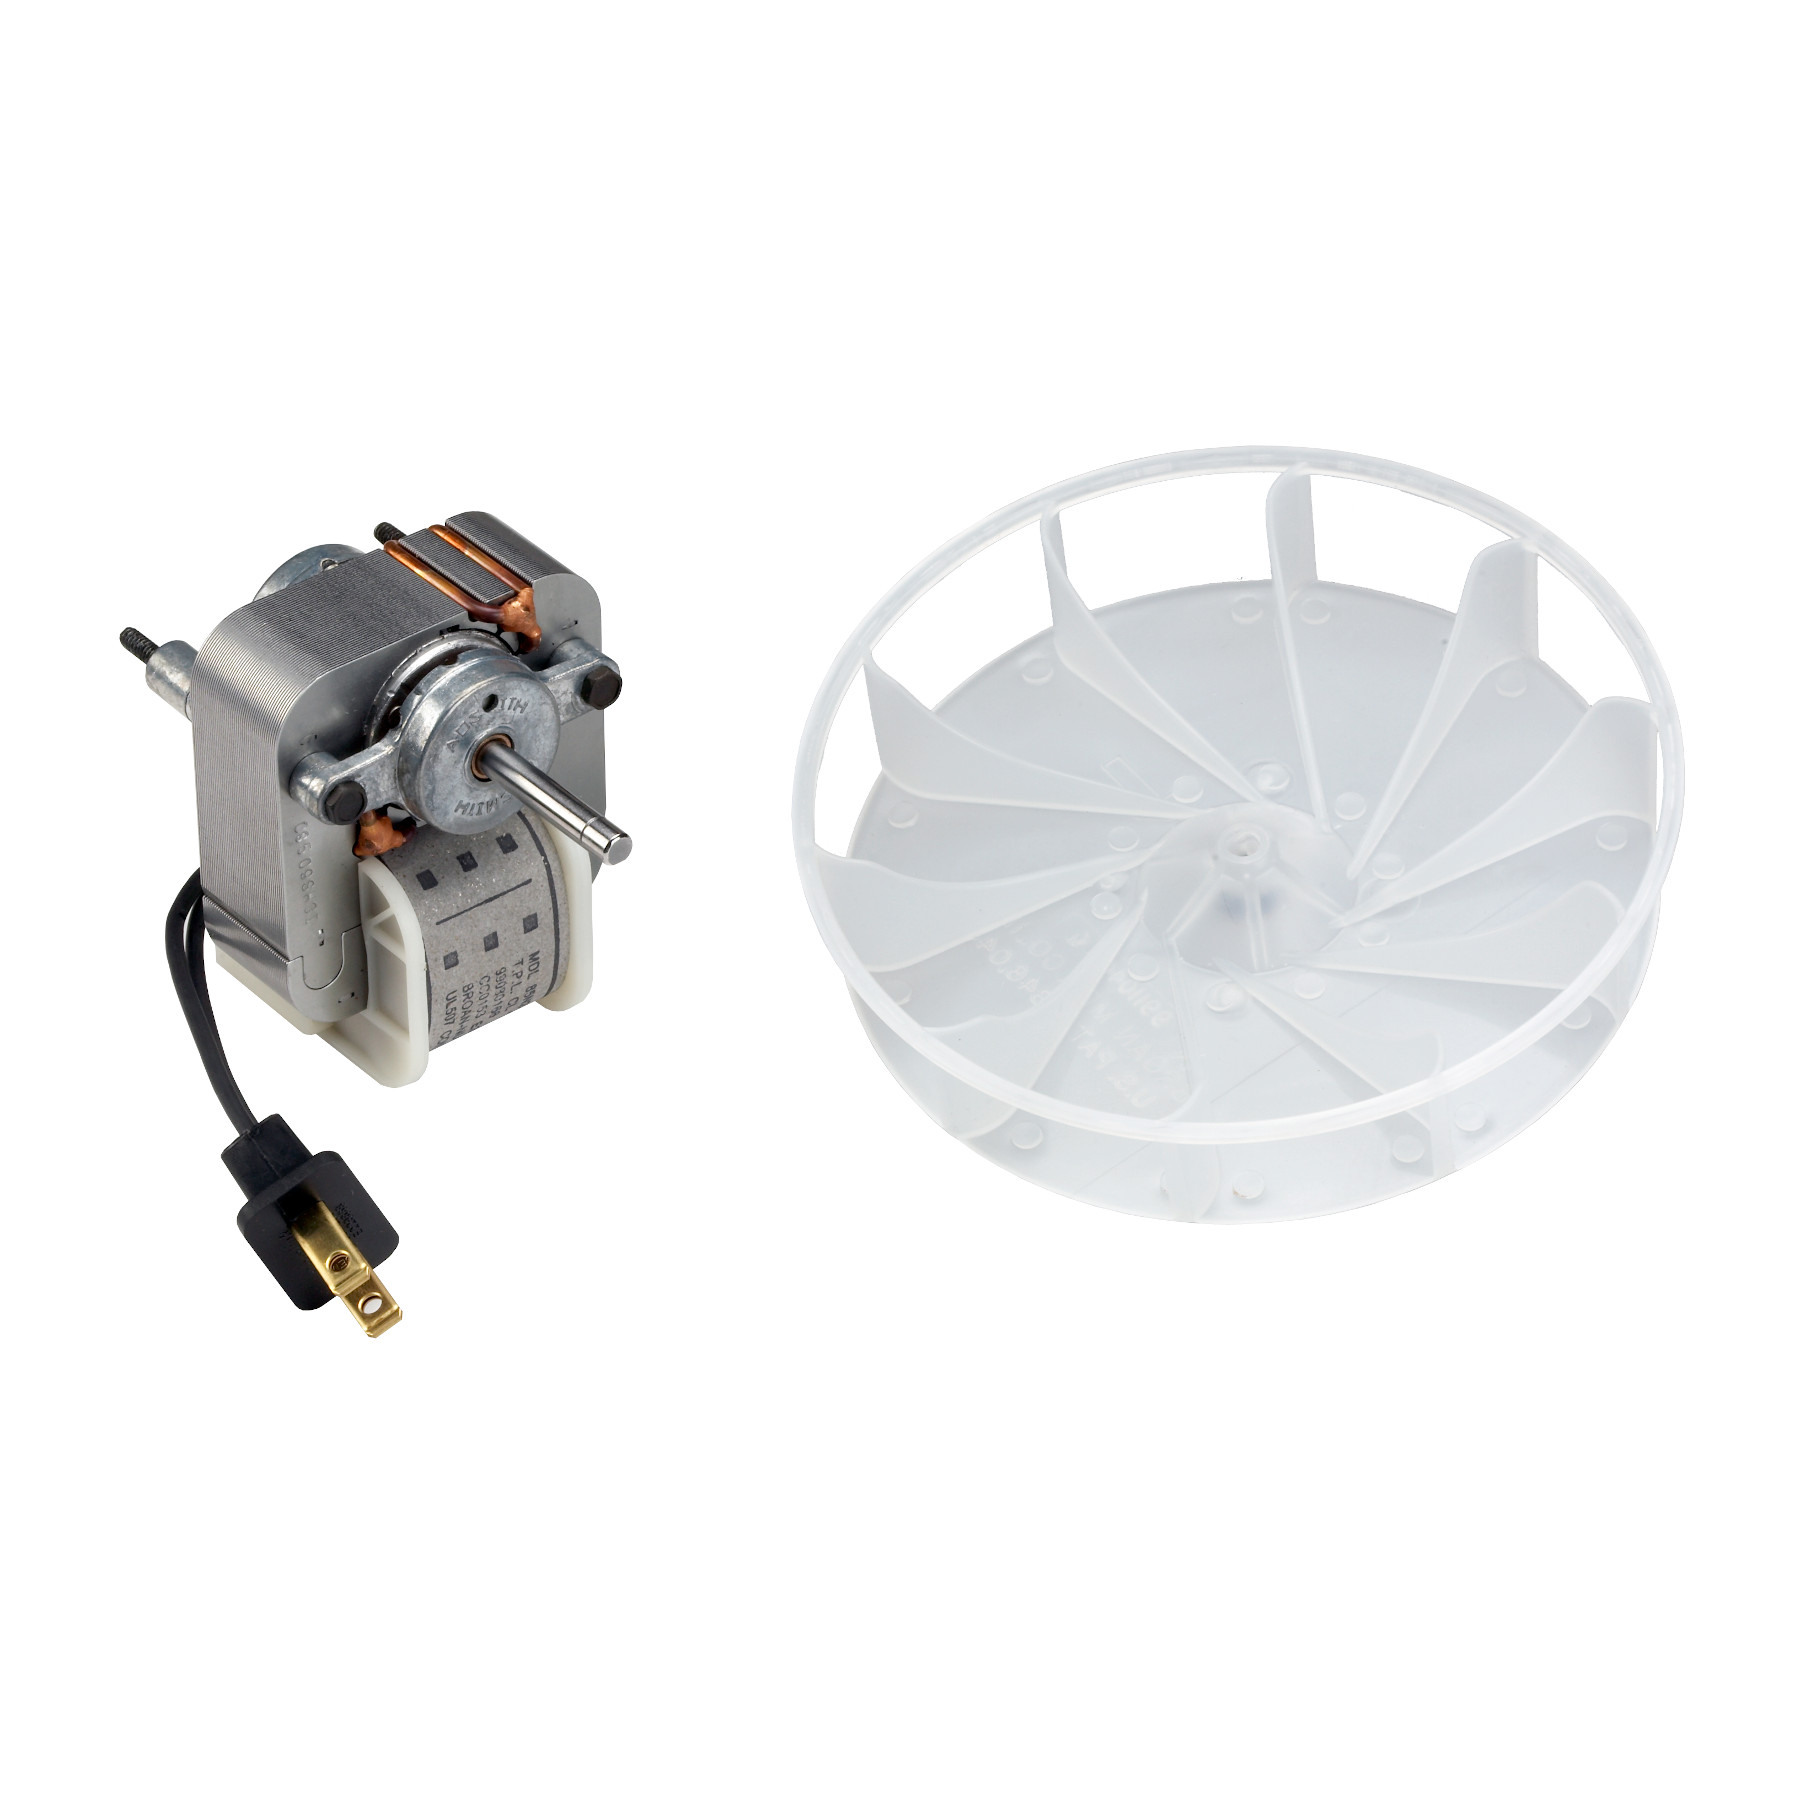 Motor/Wheel, for (694 and 695 ver. A). 70 CFM